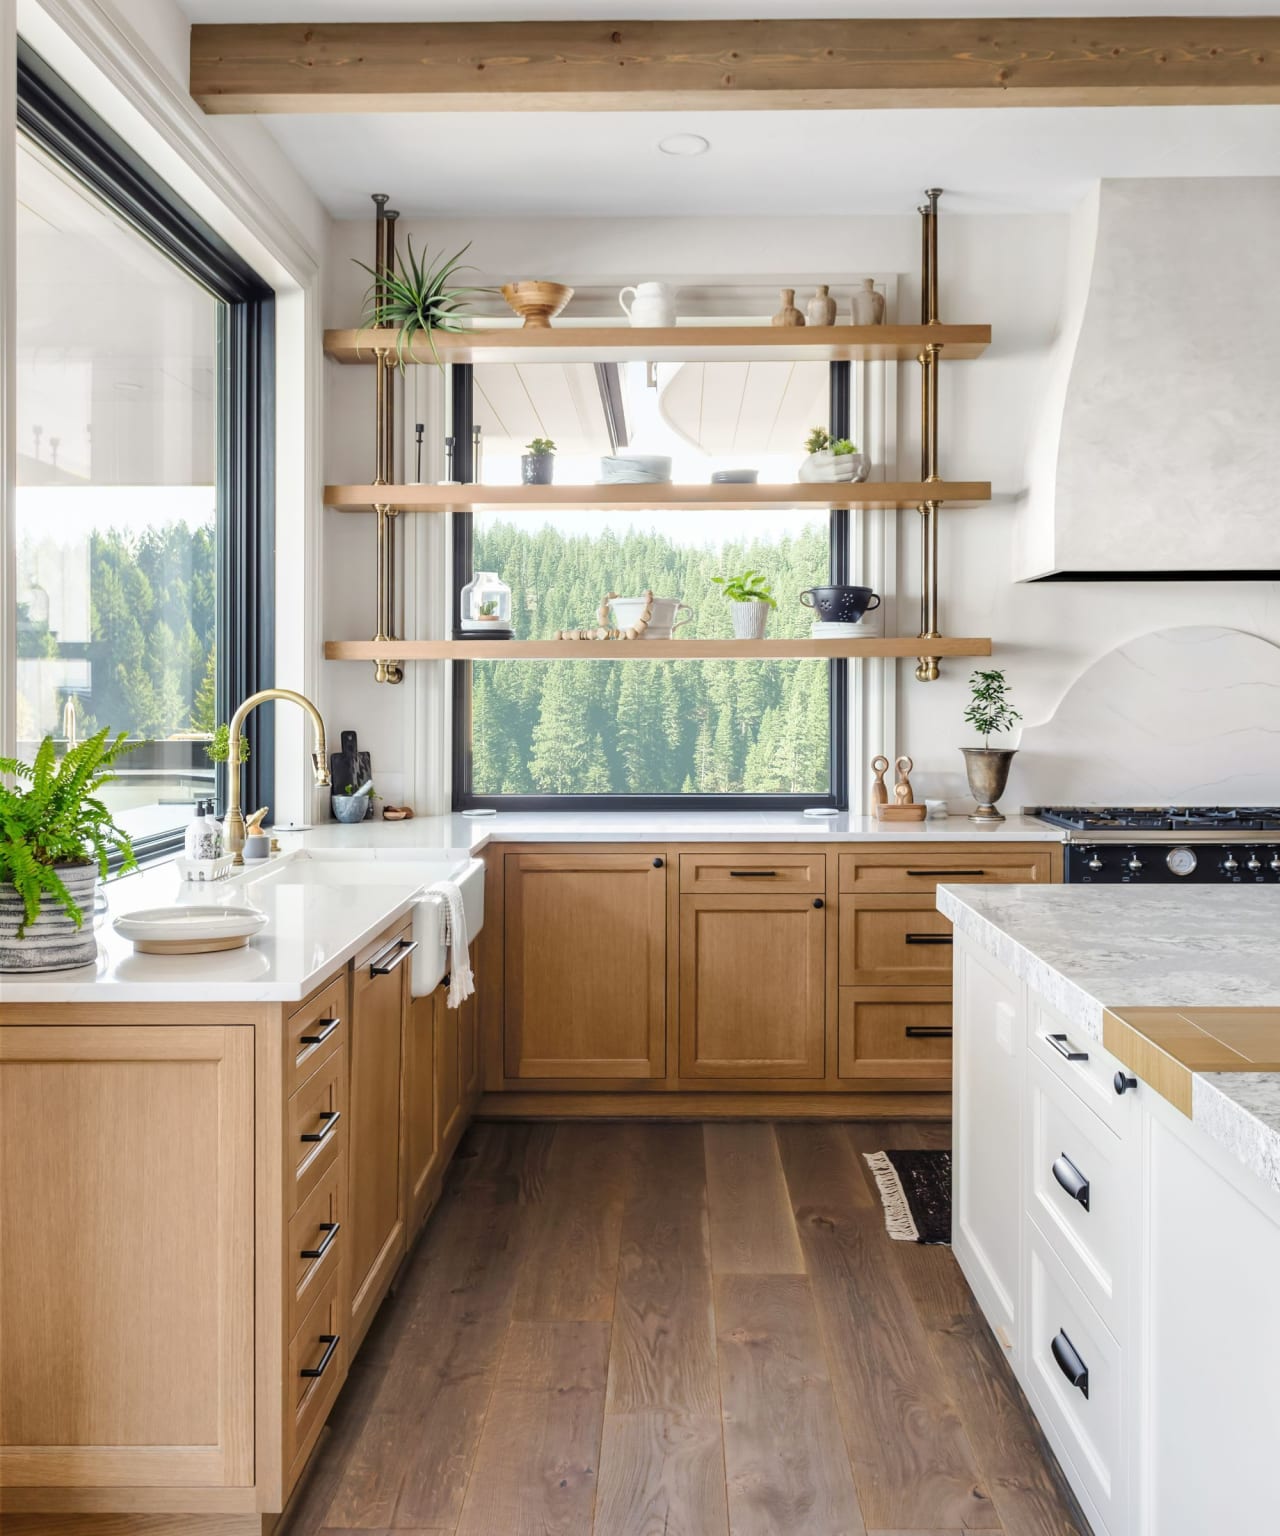 A bright and airy kitchen with wooden cabinets lining the walls.